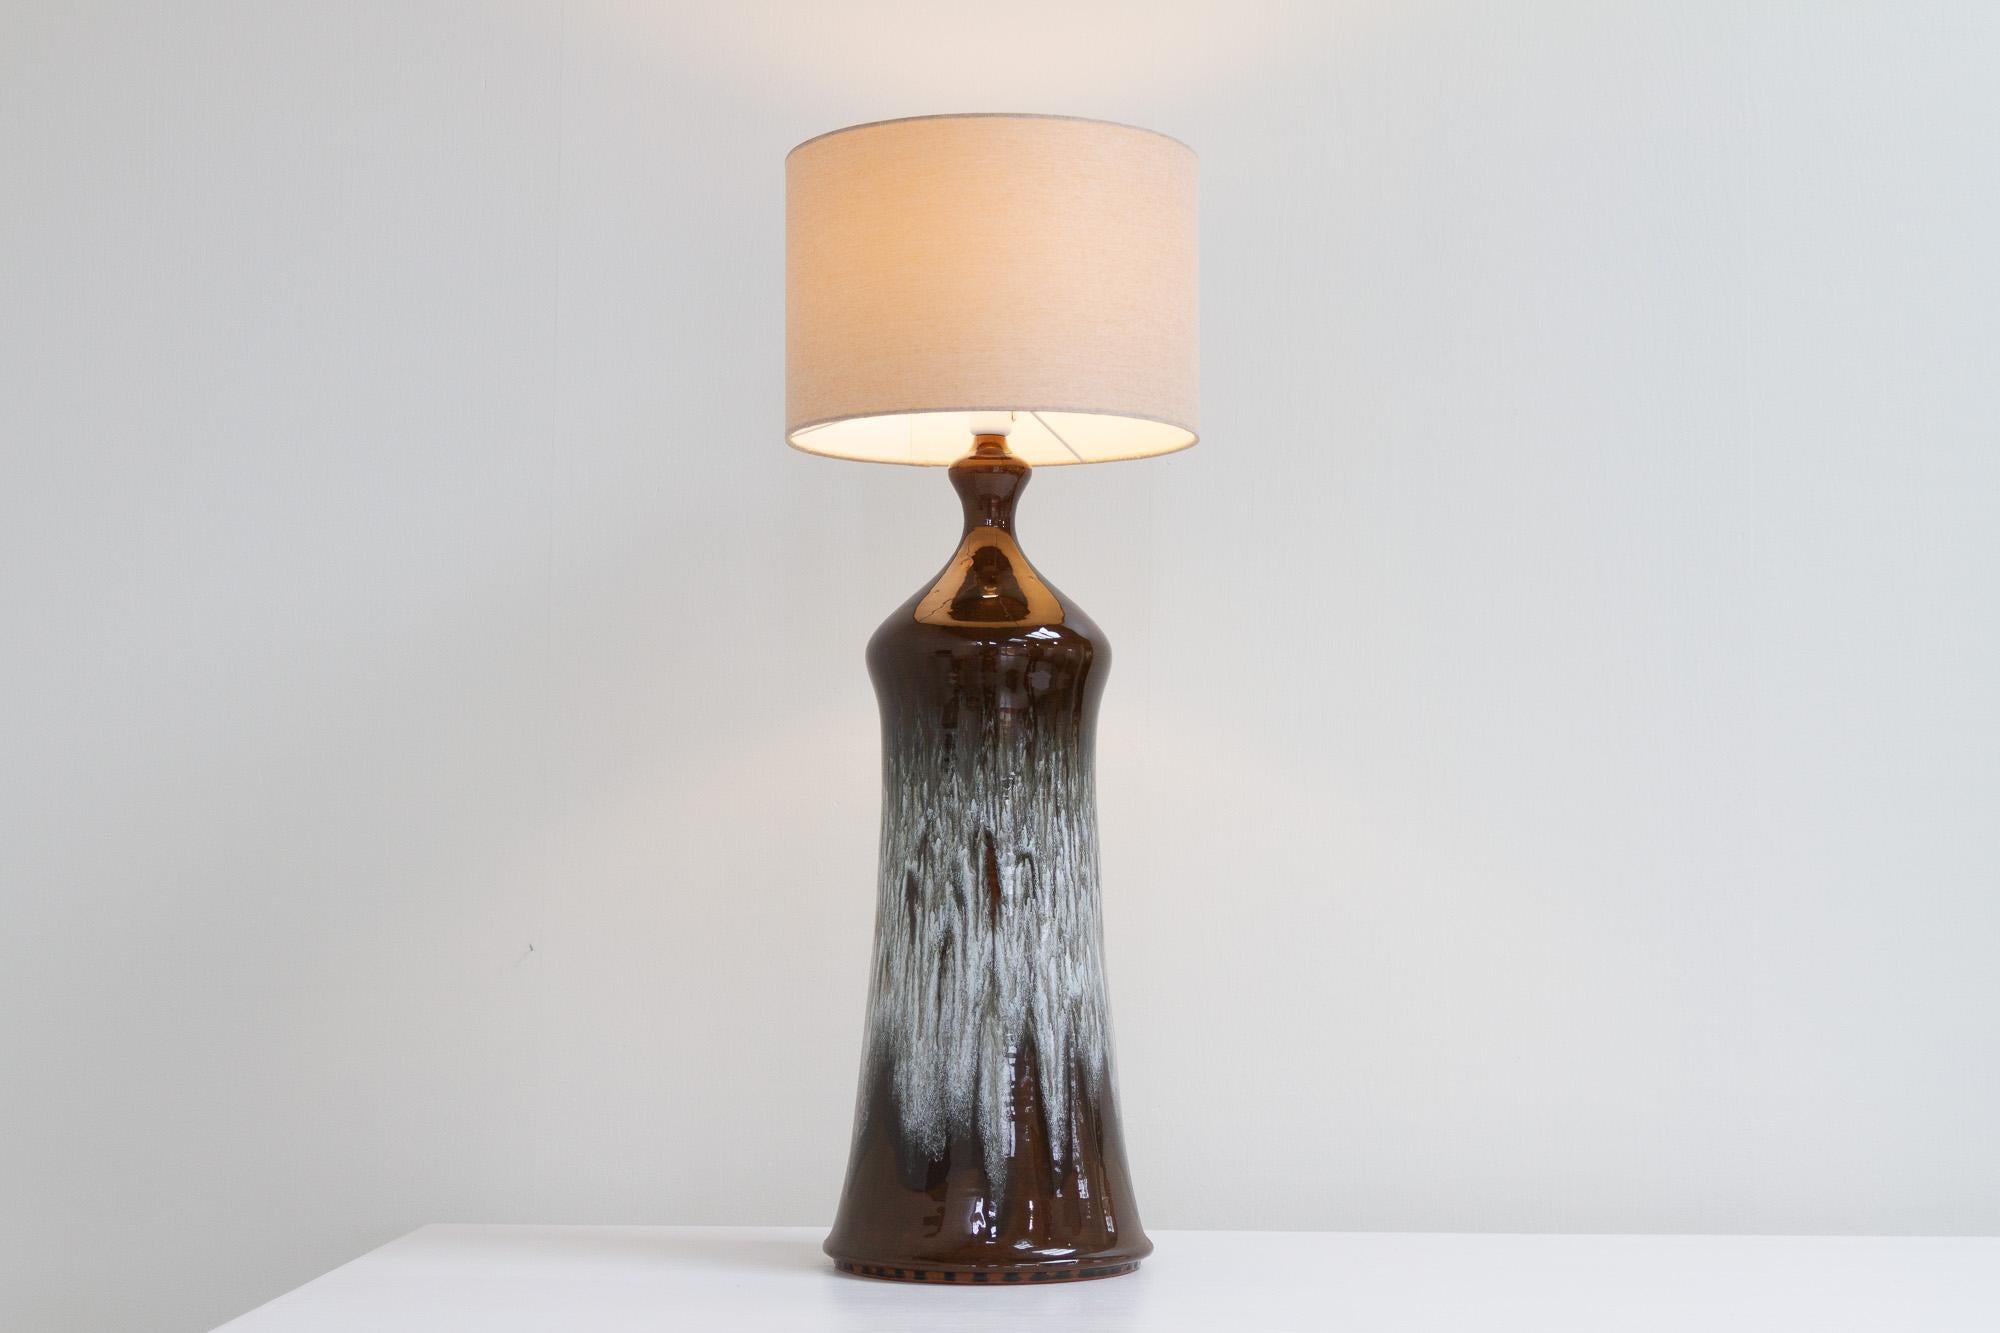 Vintage Danish ceramic floor lamp by Tjelberg, 1970s.
Large Mid-Century Modern ceramic floor lamp including shade, designed and manufactured by Jørgen Tjelberg Hansen, Denmark in the 1970s.
Glaze in beautiful brown and white colors. A great